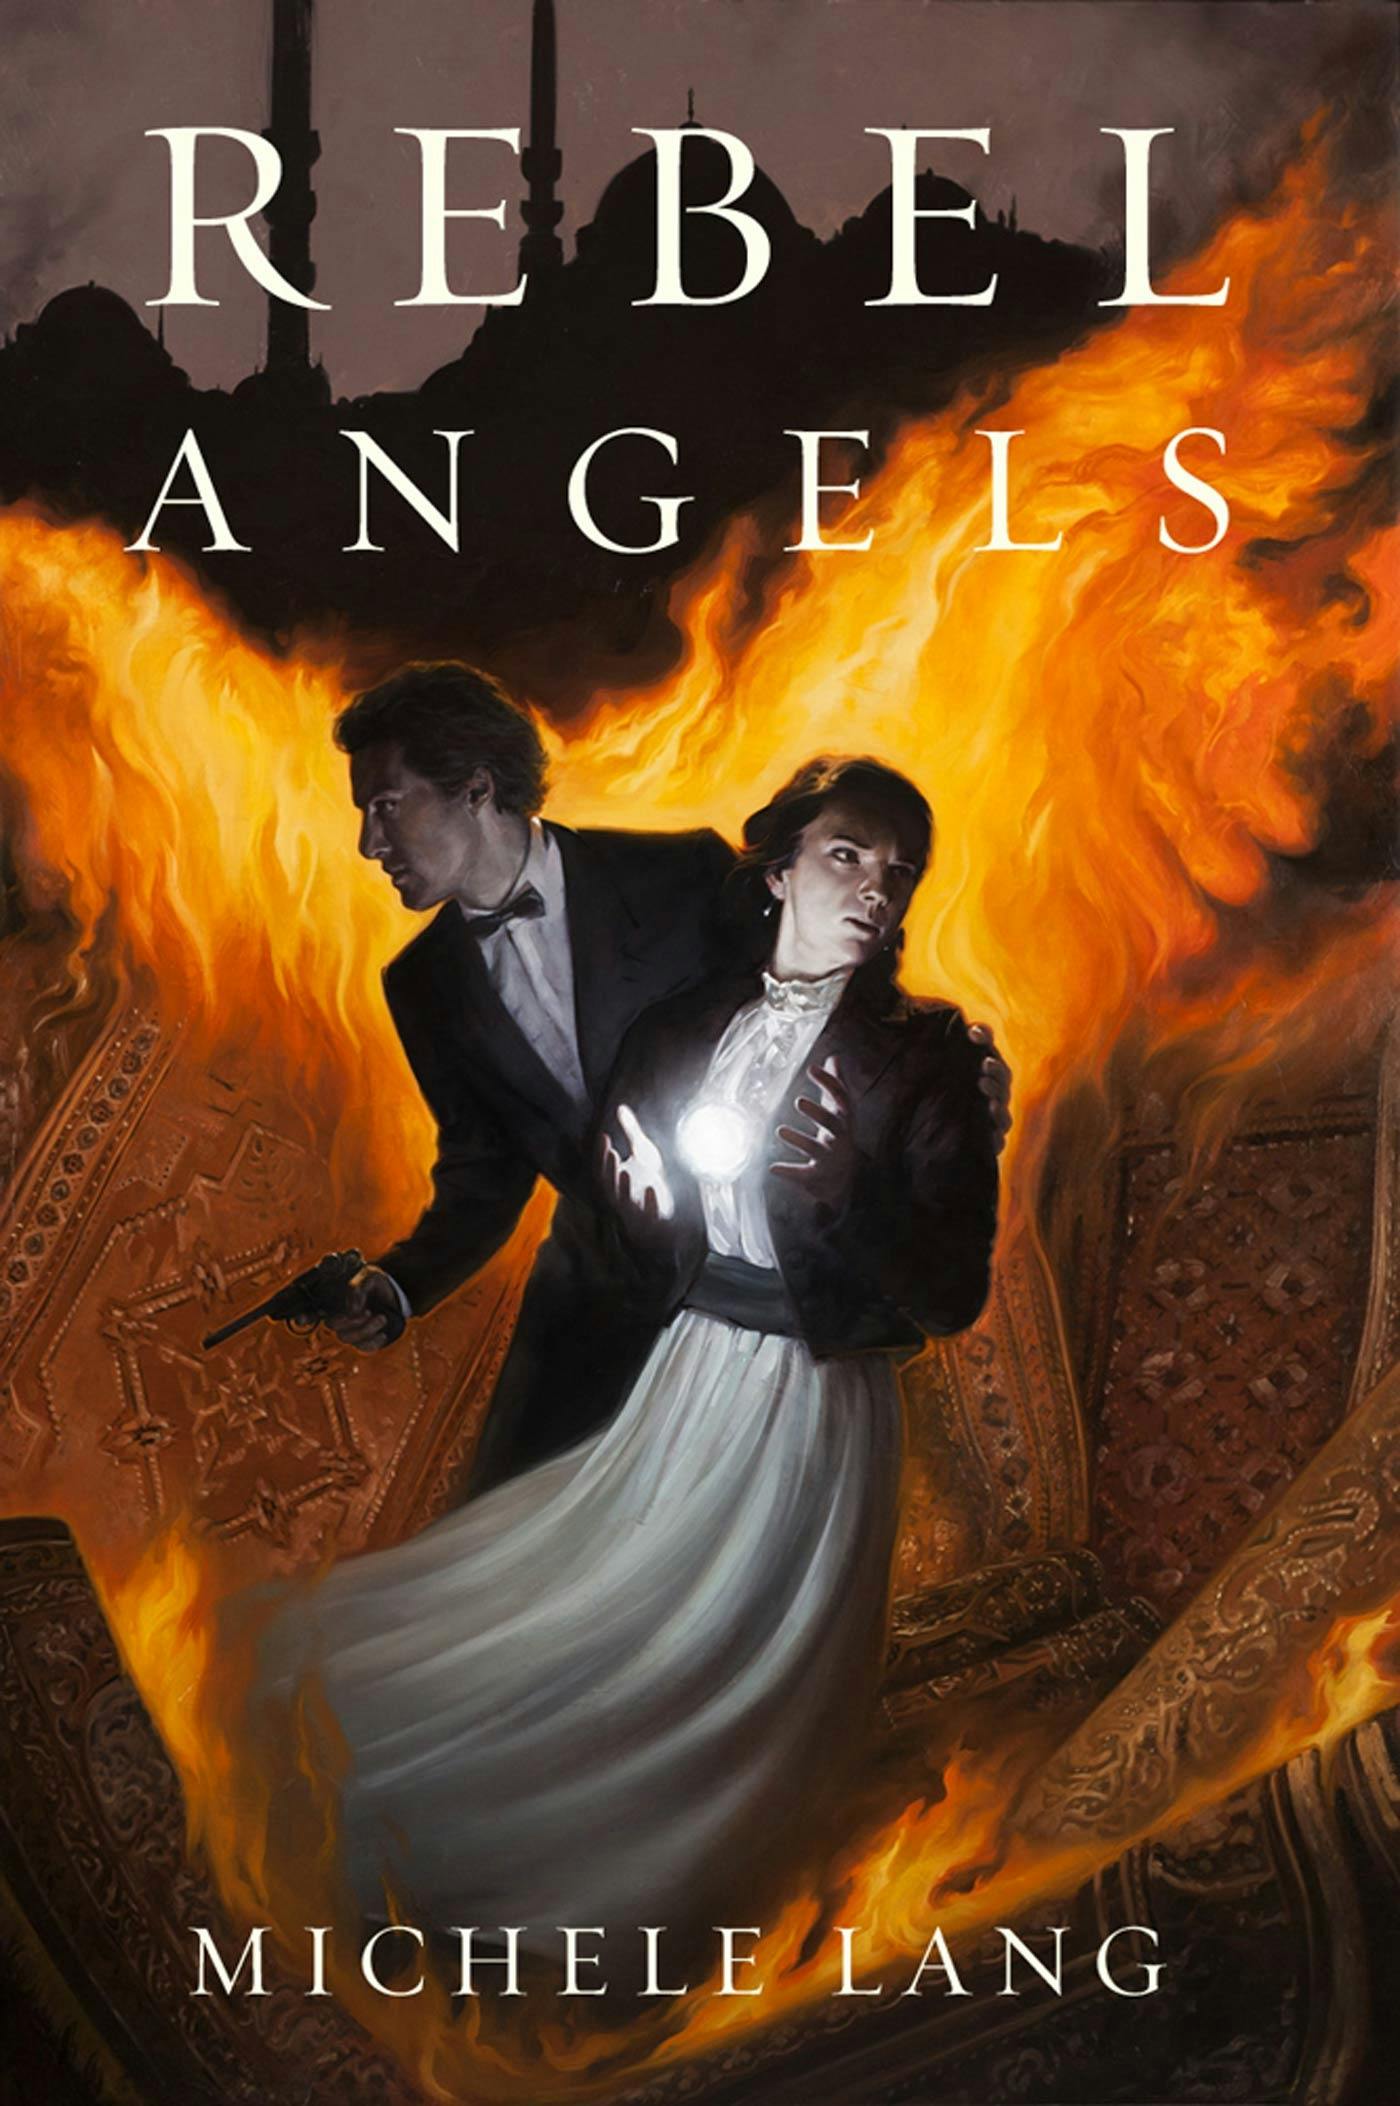 Cover for the book titled as: Rebel Angels